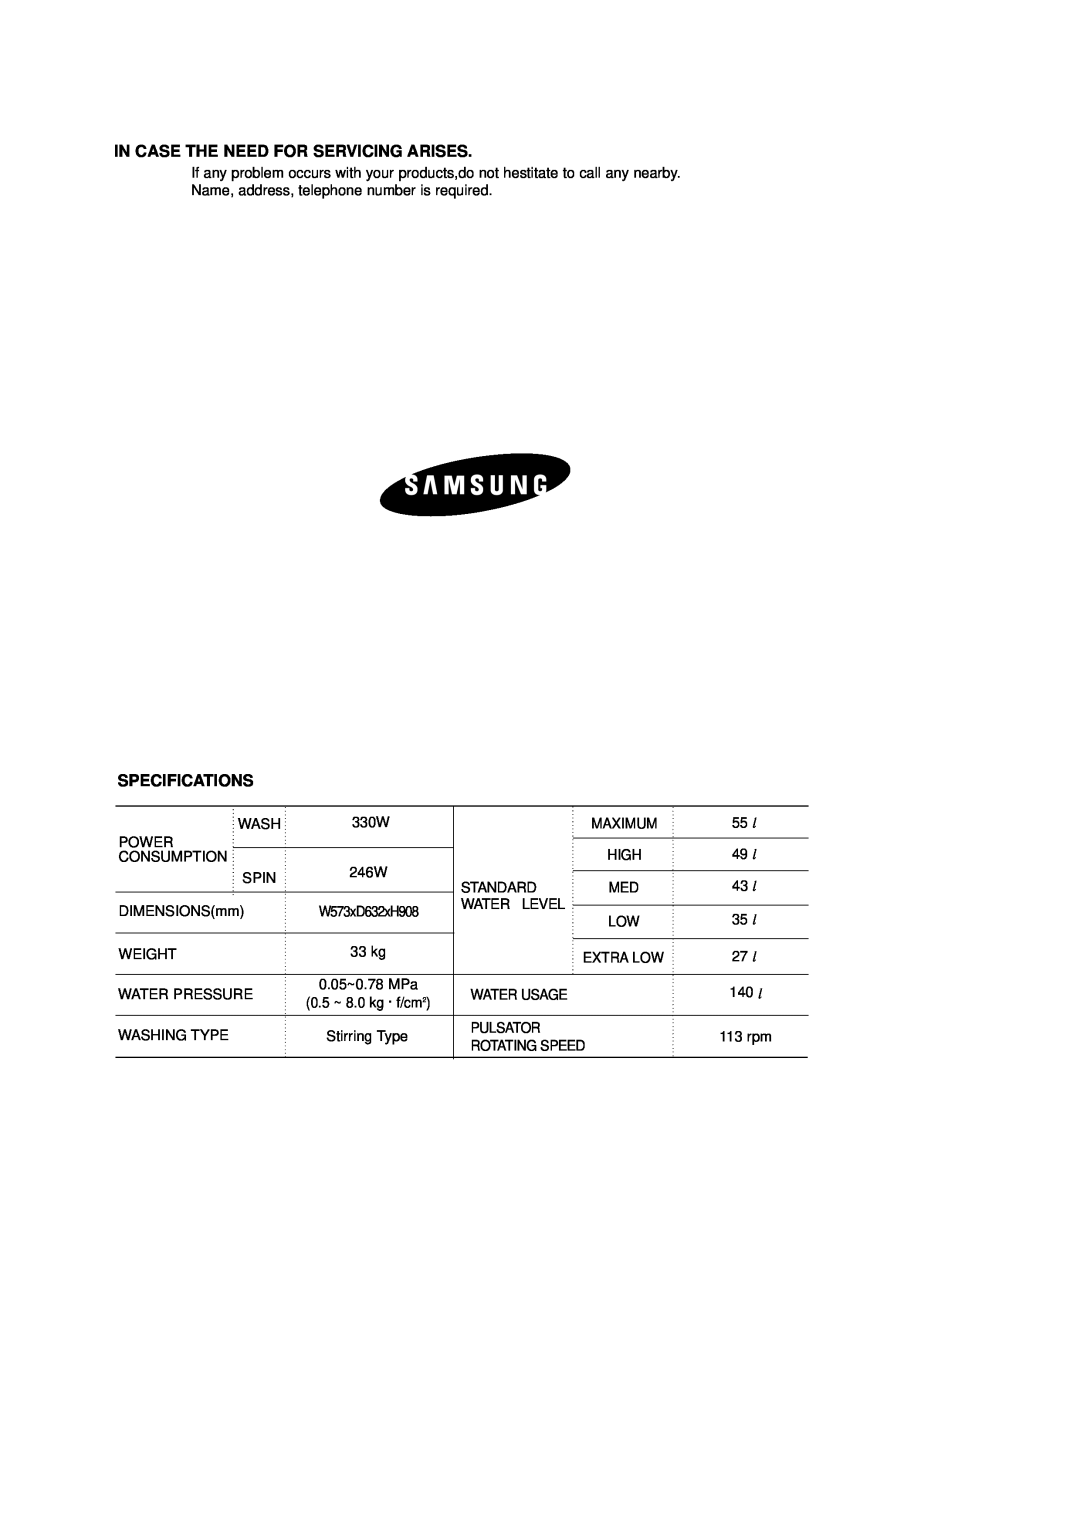 Samsung DC68-02154A user manual In Case The Need For Servicing Arises, Specifications 